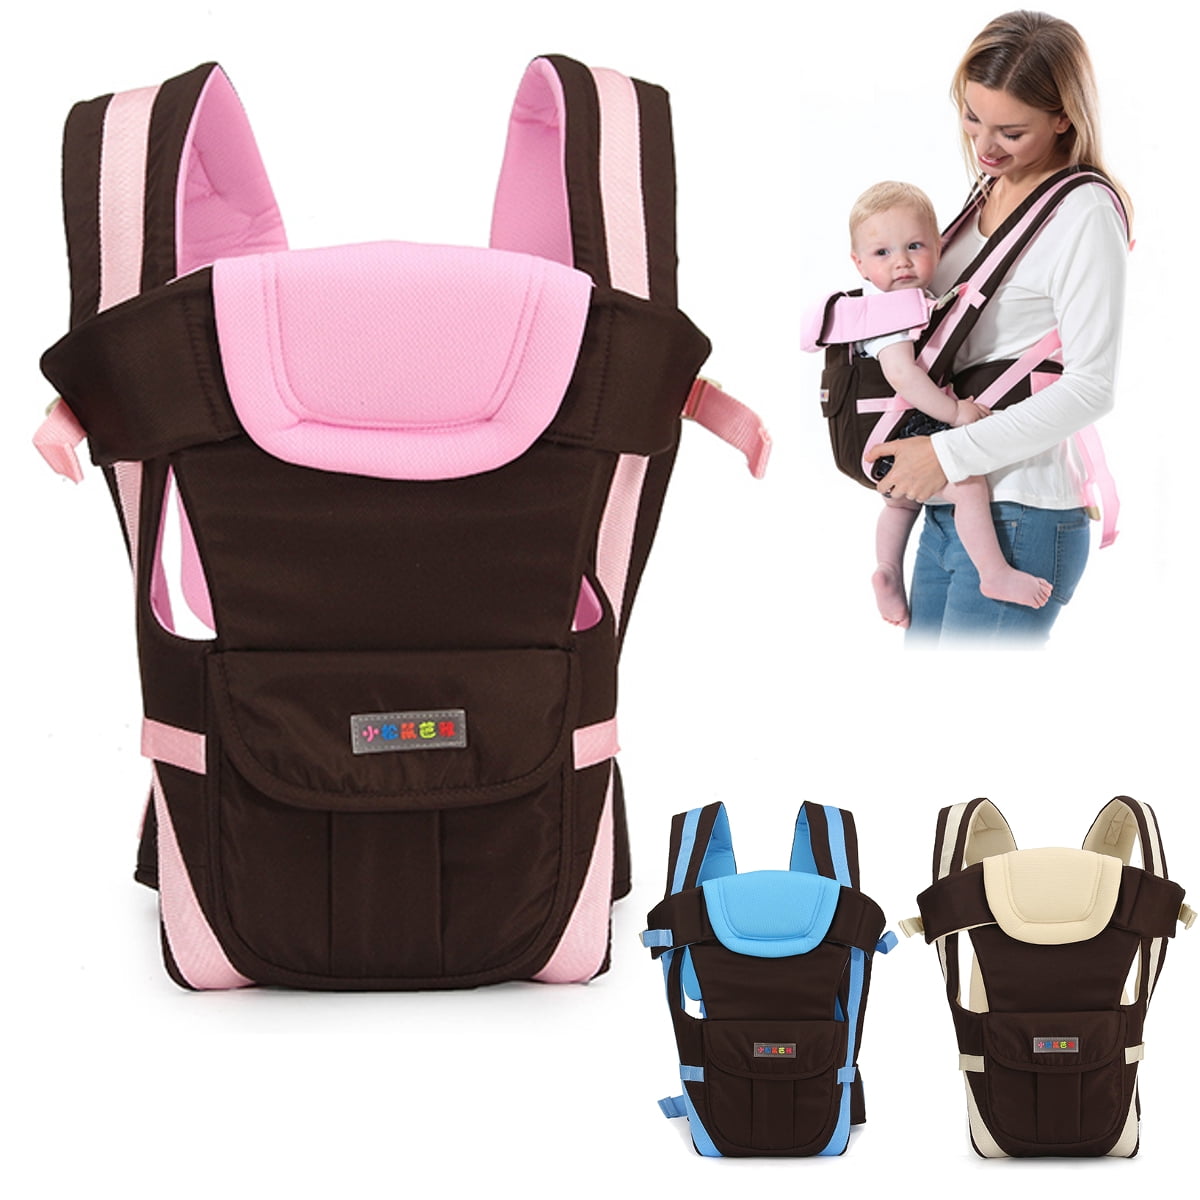 New Baby Infant Newborn Adjustable Carrier Sling Wrap Rider cotton Backpack 